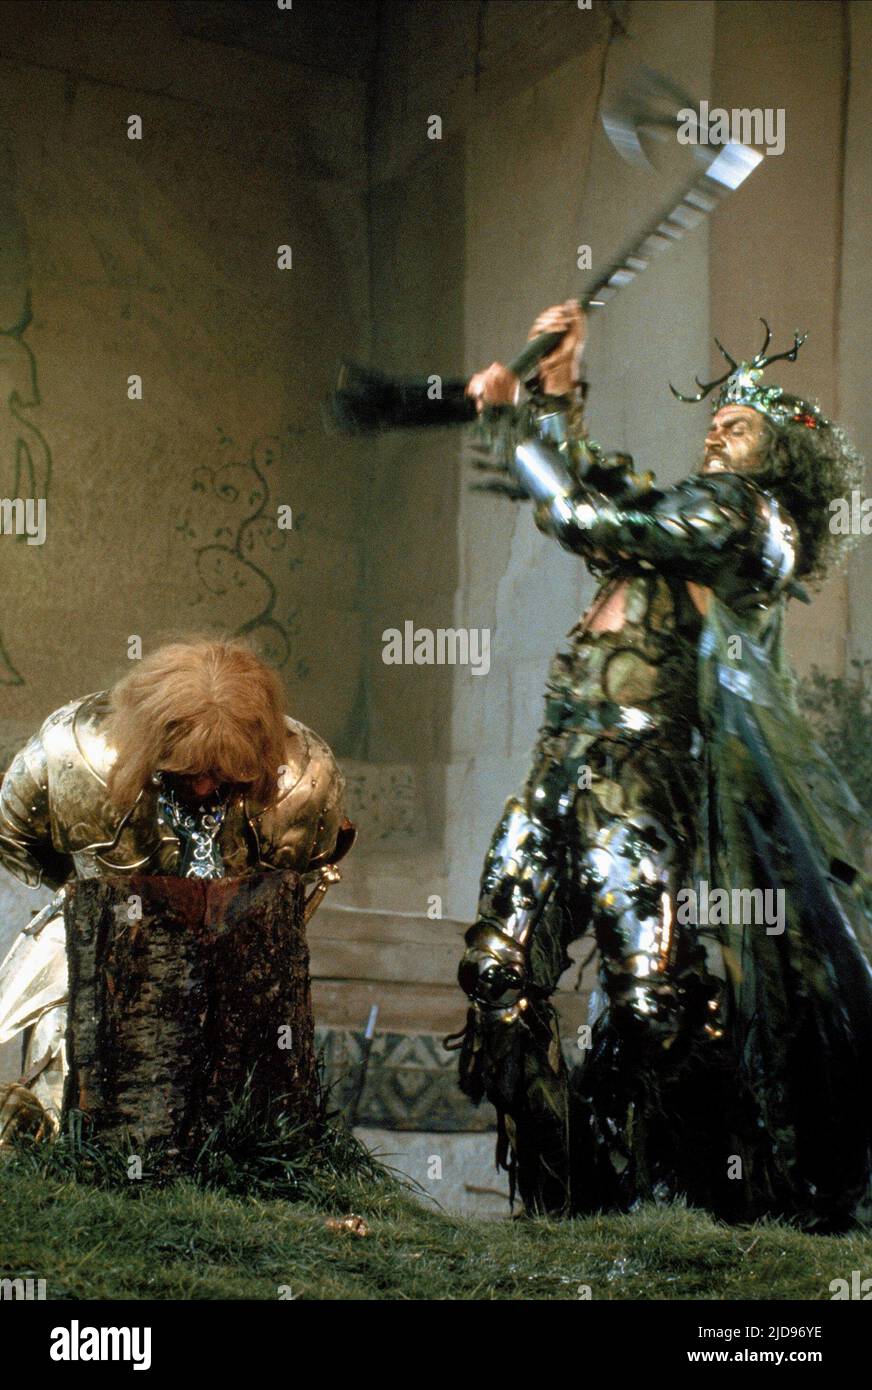 O'KEEFFE,CONNERY, SWORD OF THE VALIANT: THE LEGEND OF SIR GAWAIN AND THE GREEN KNIGHT, 1984, Stock Photo